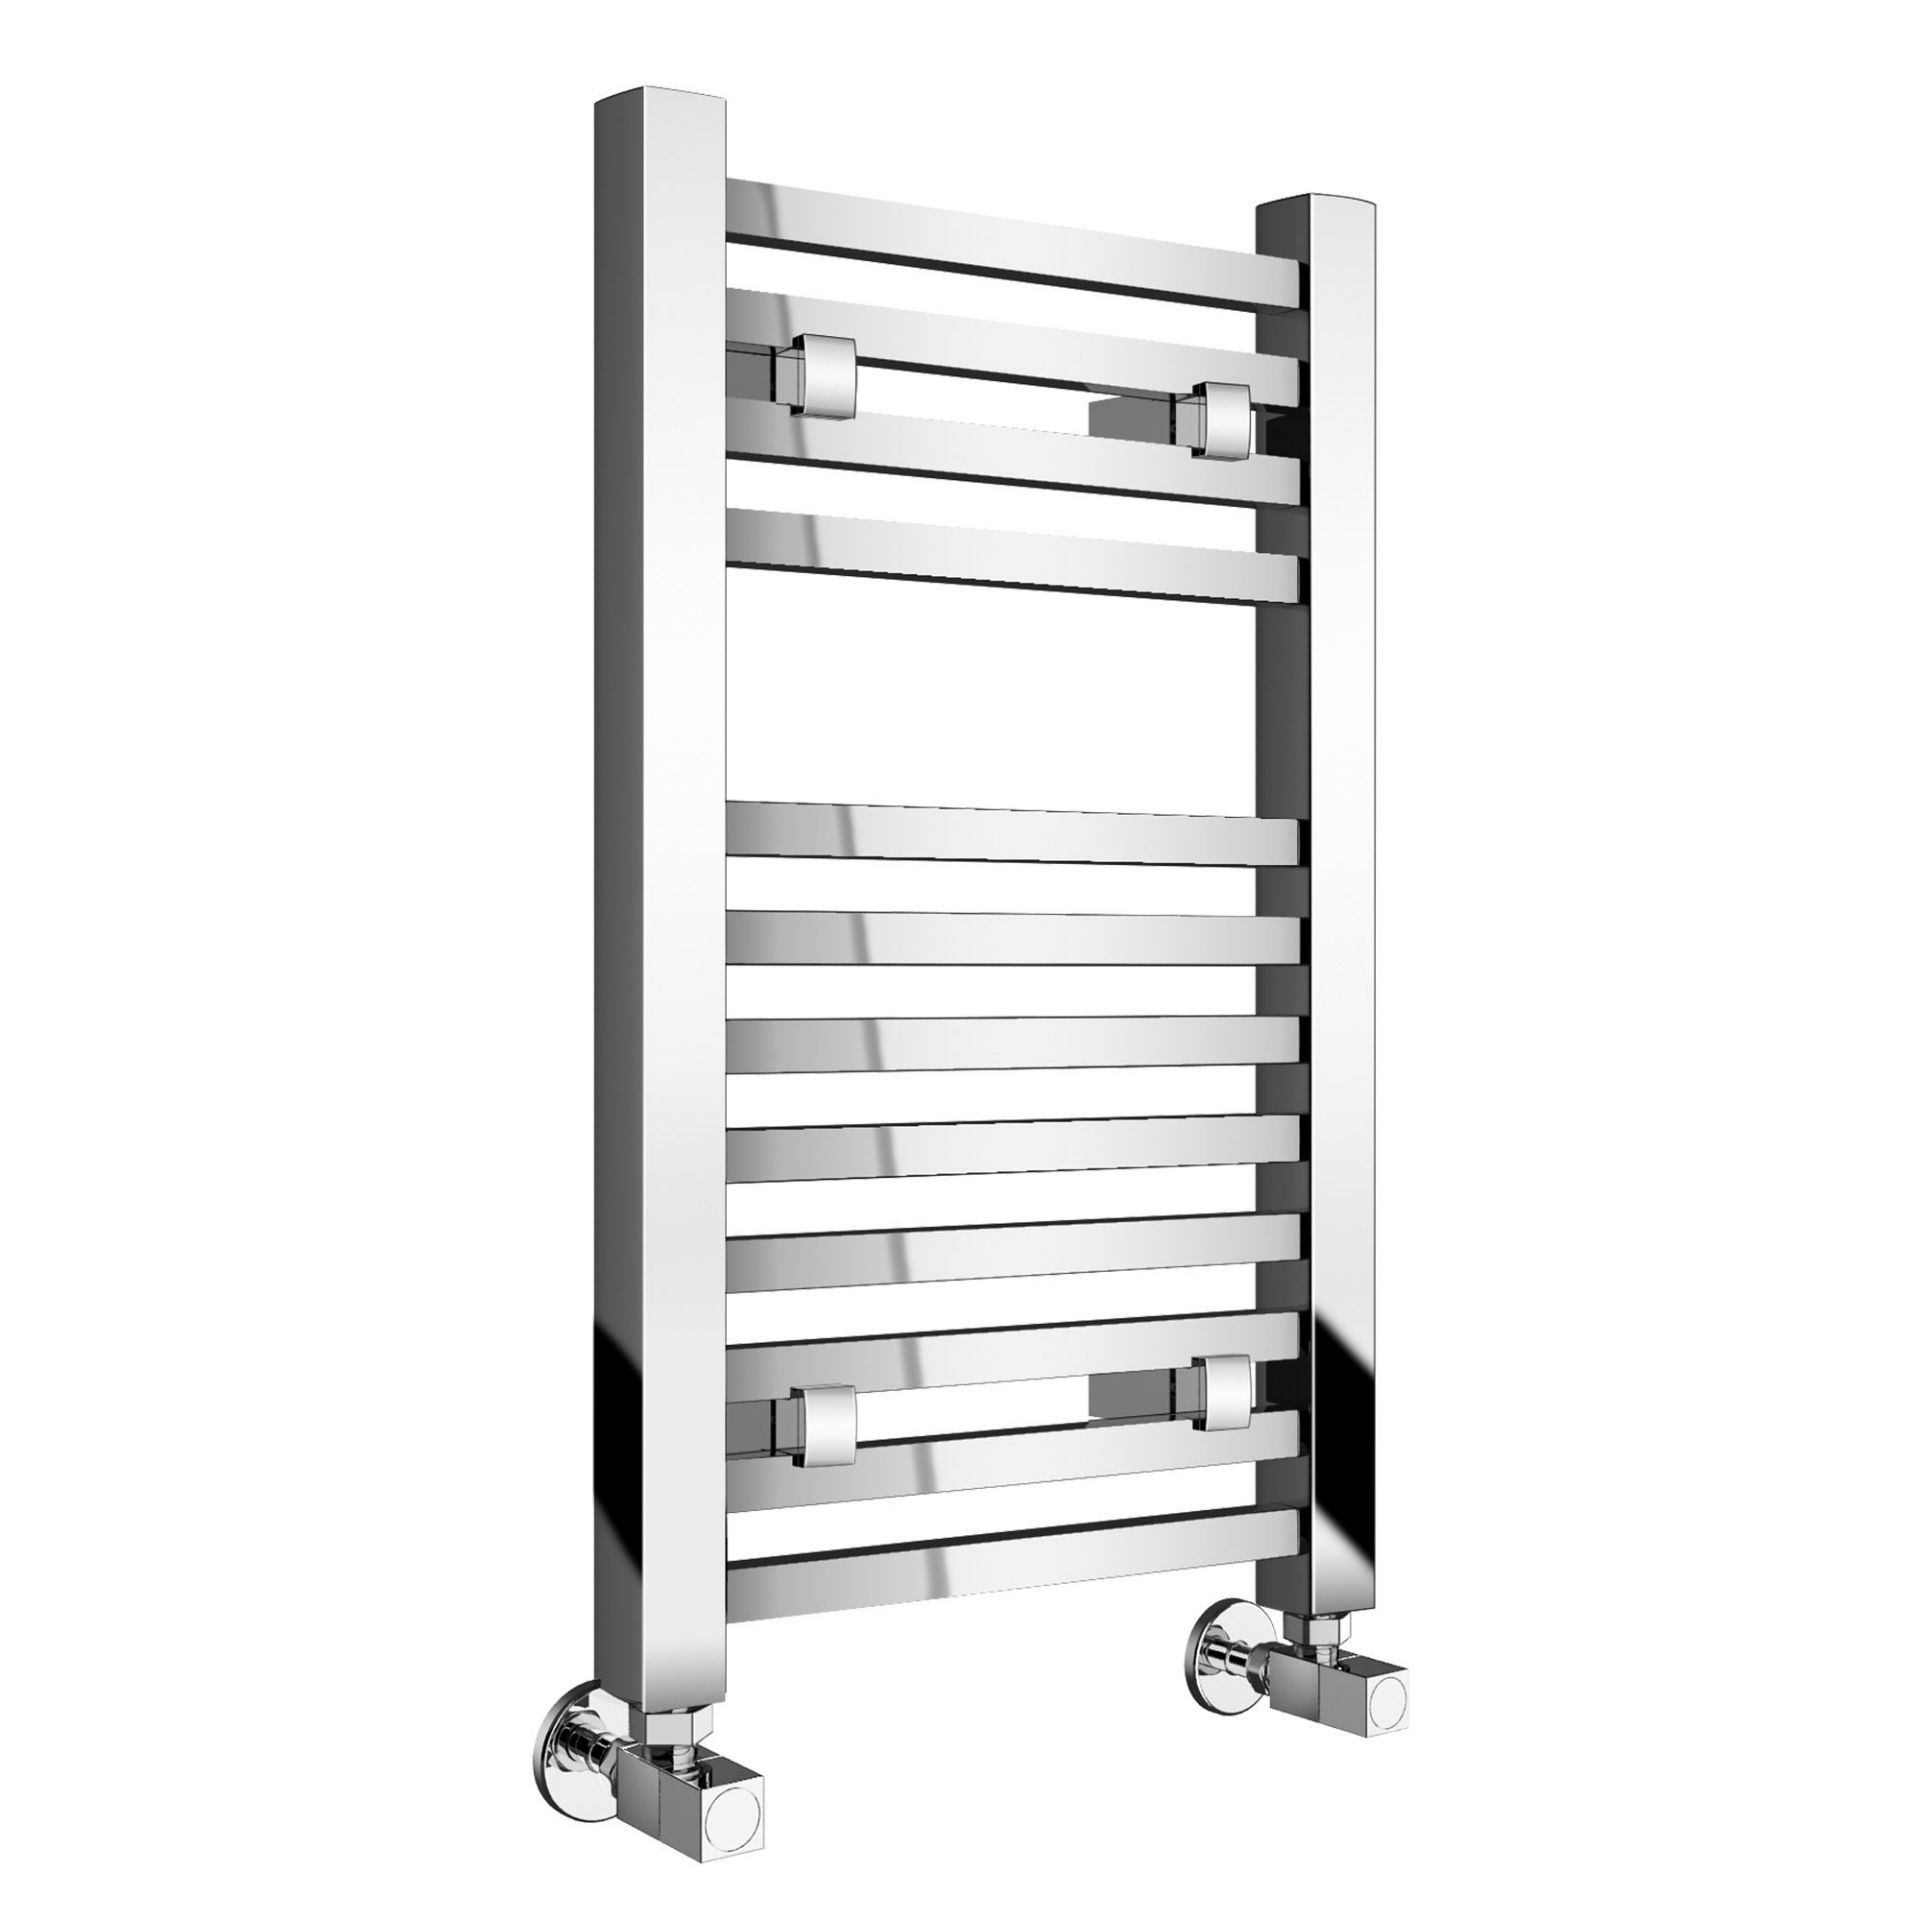 (TY18) 650x400mm Chrome Square Rail Ladder Towel Radiator. RRP £184.99. Made from low carbon steel - Image 2 of 3